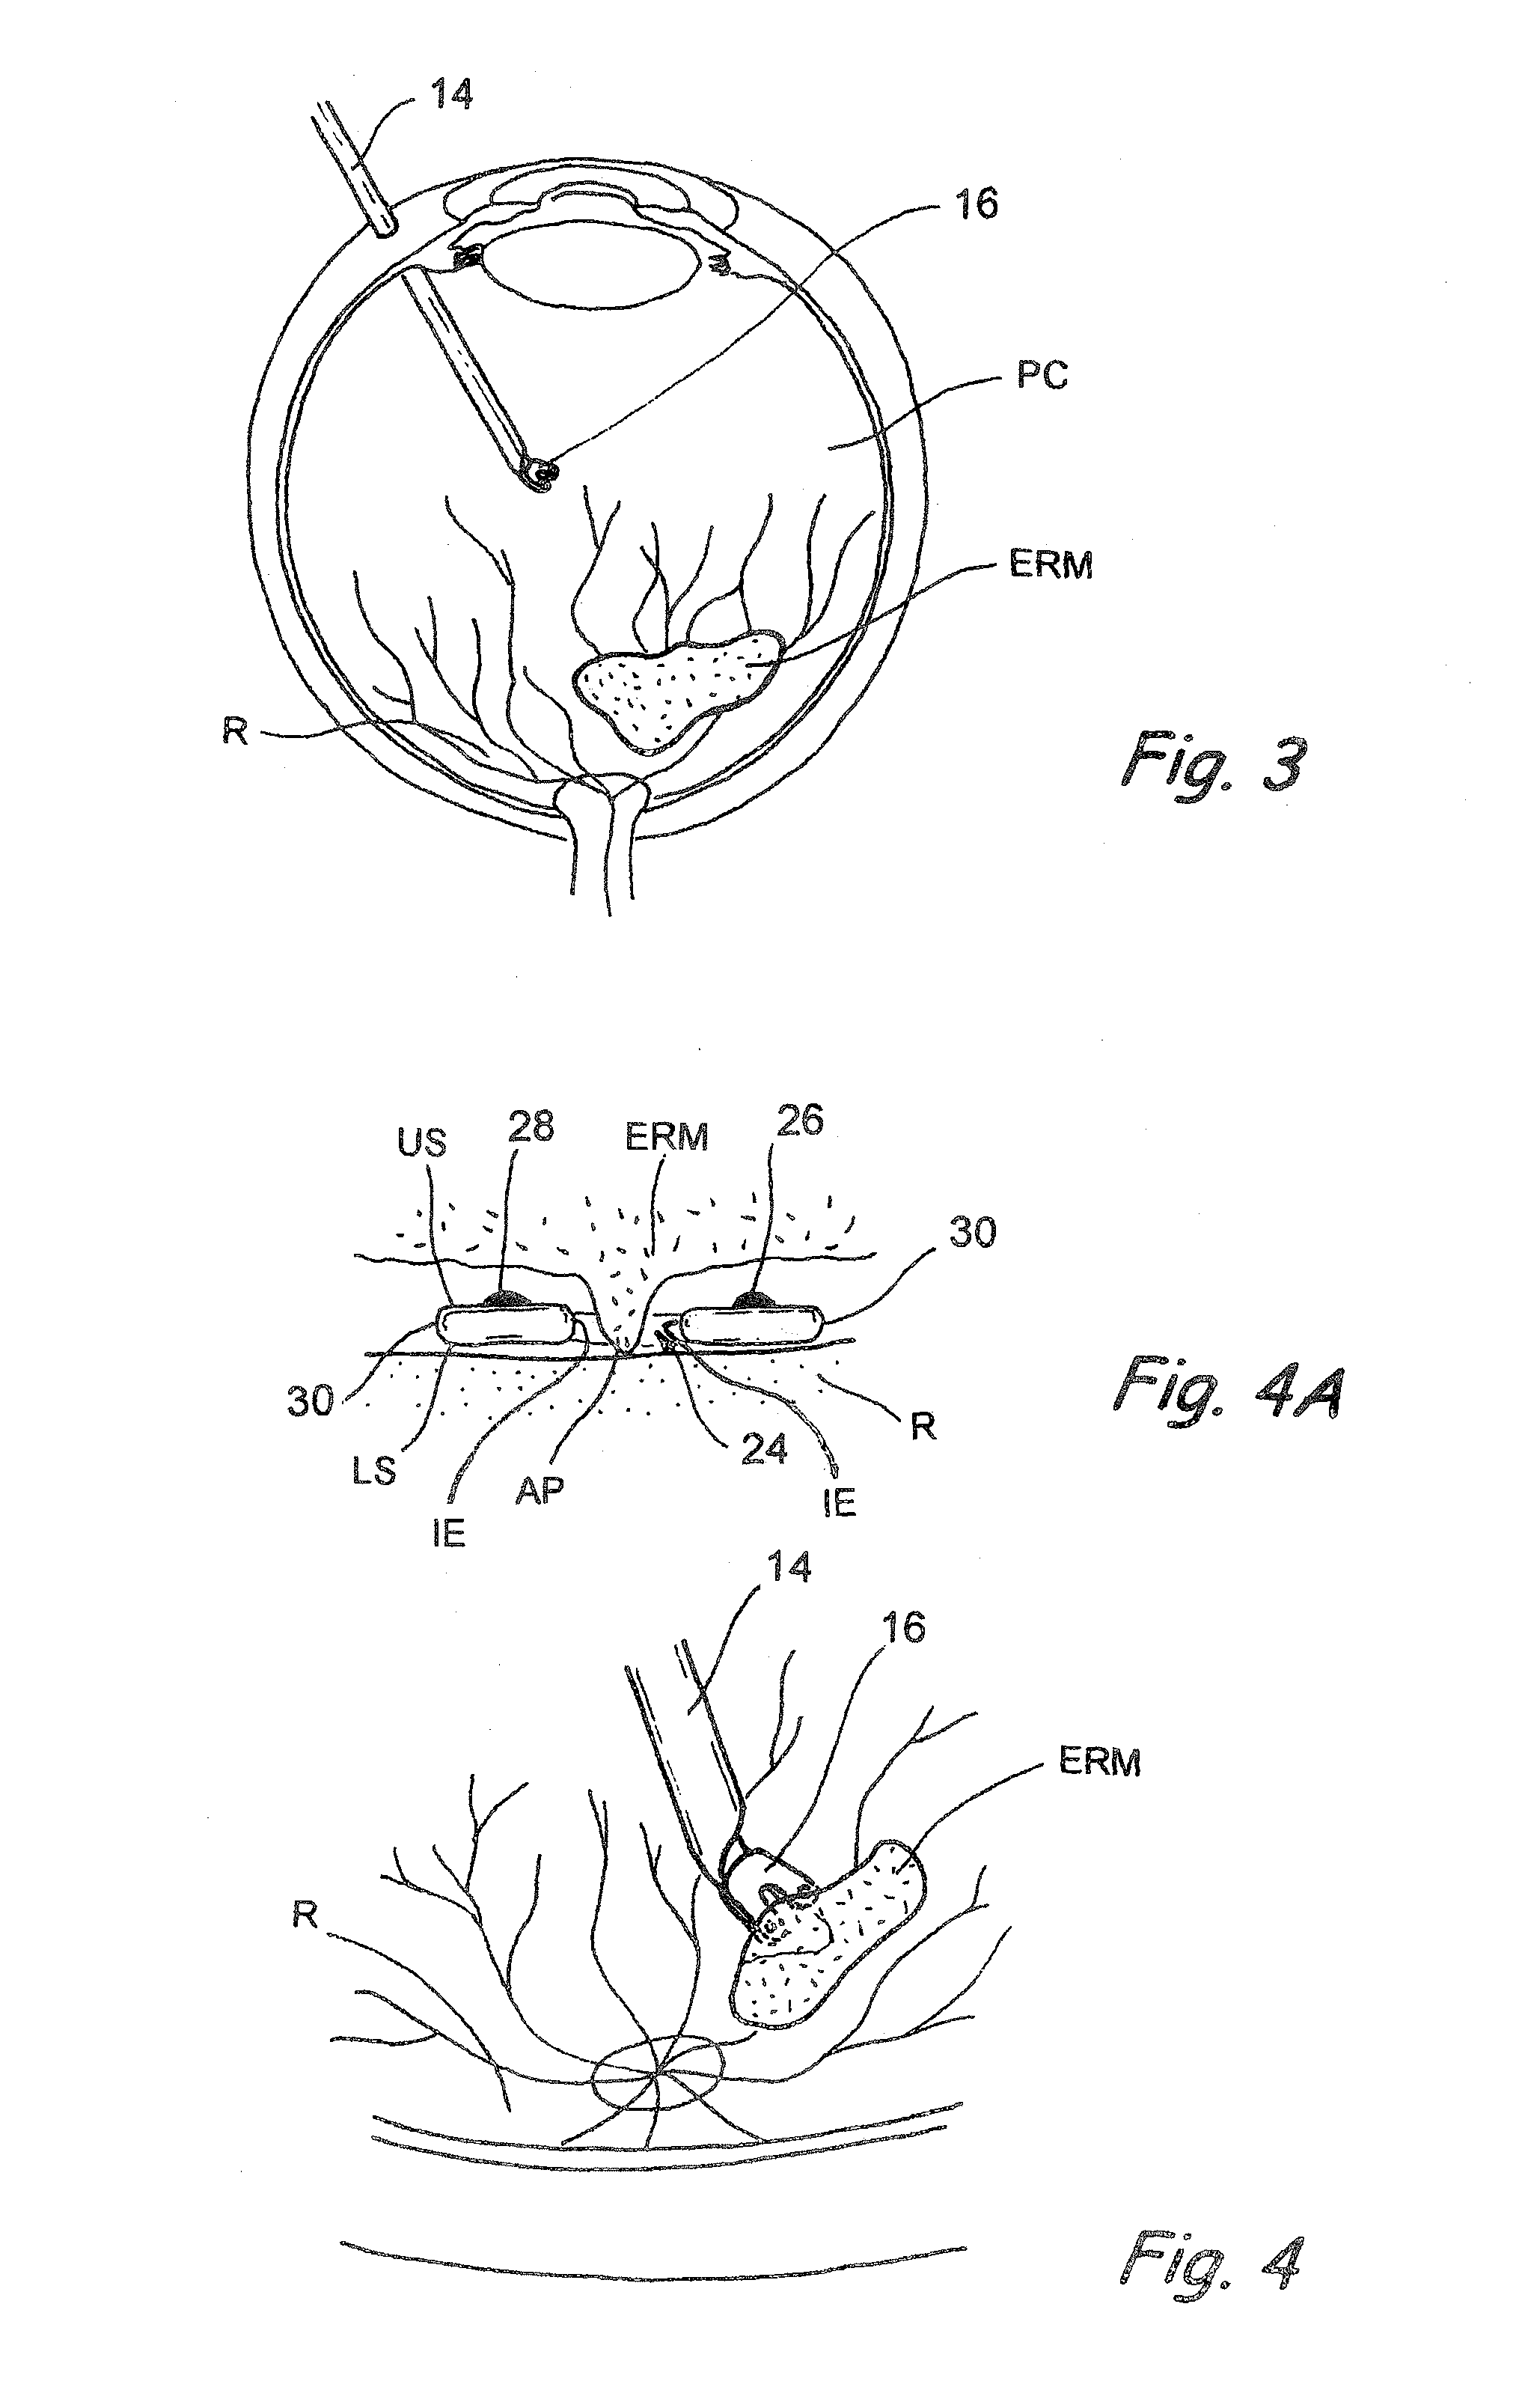 Electrosurgical devices and methods for selective cutting of tissue